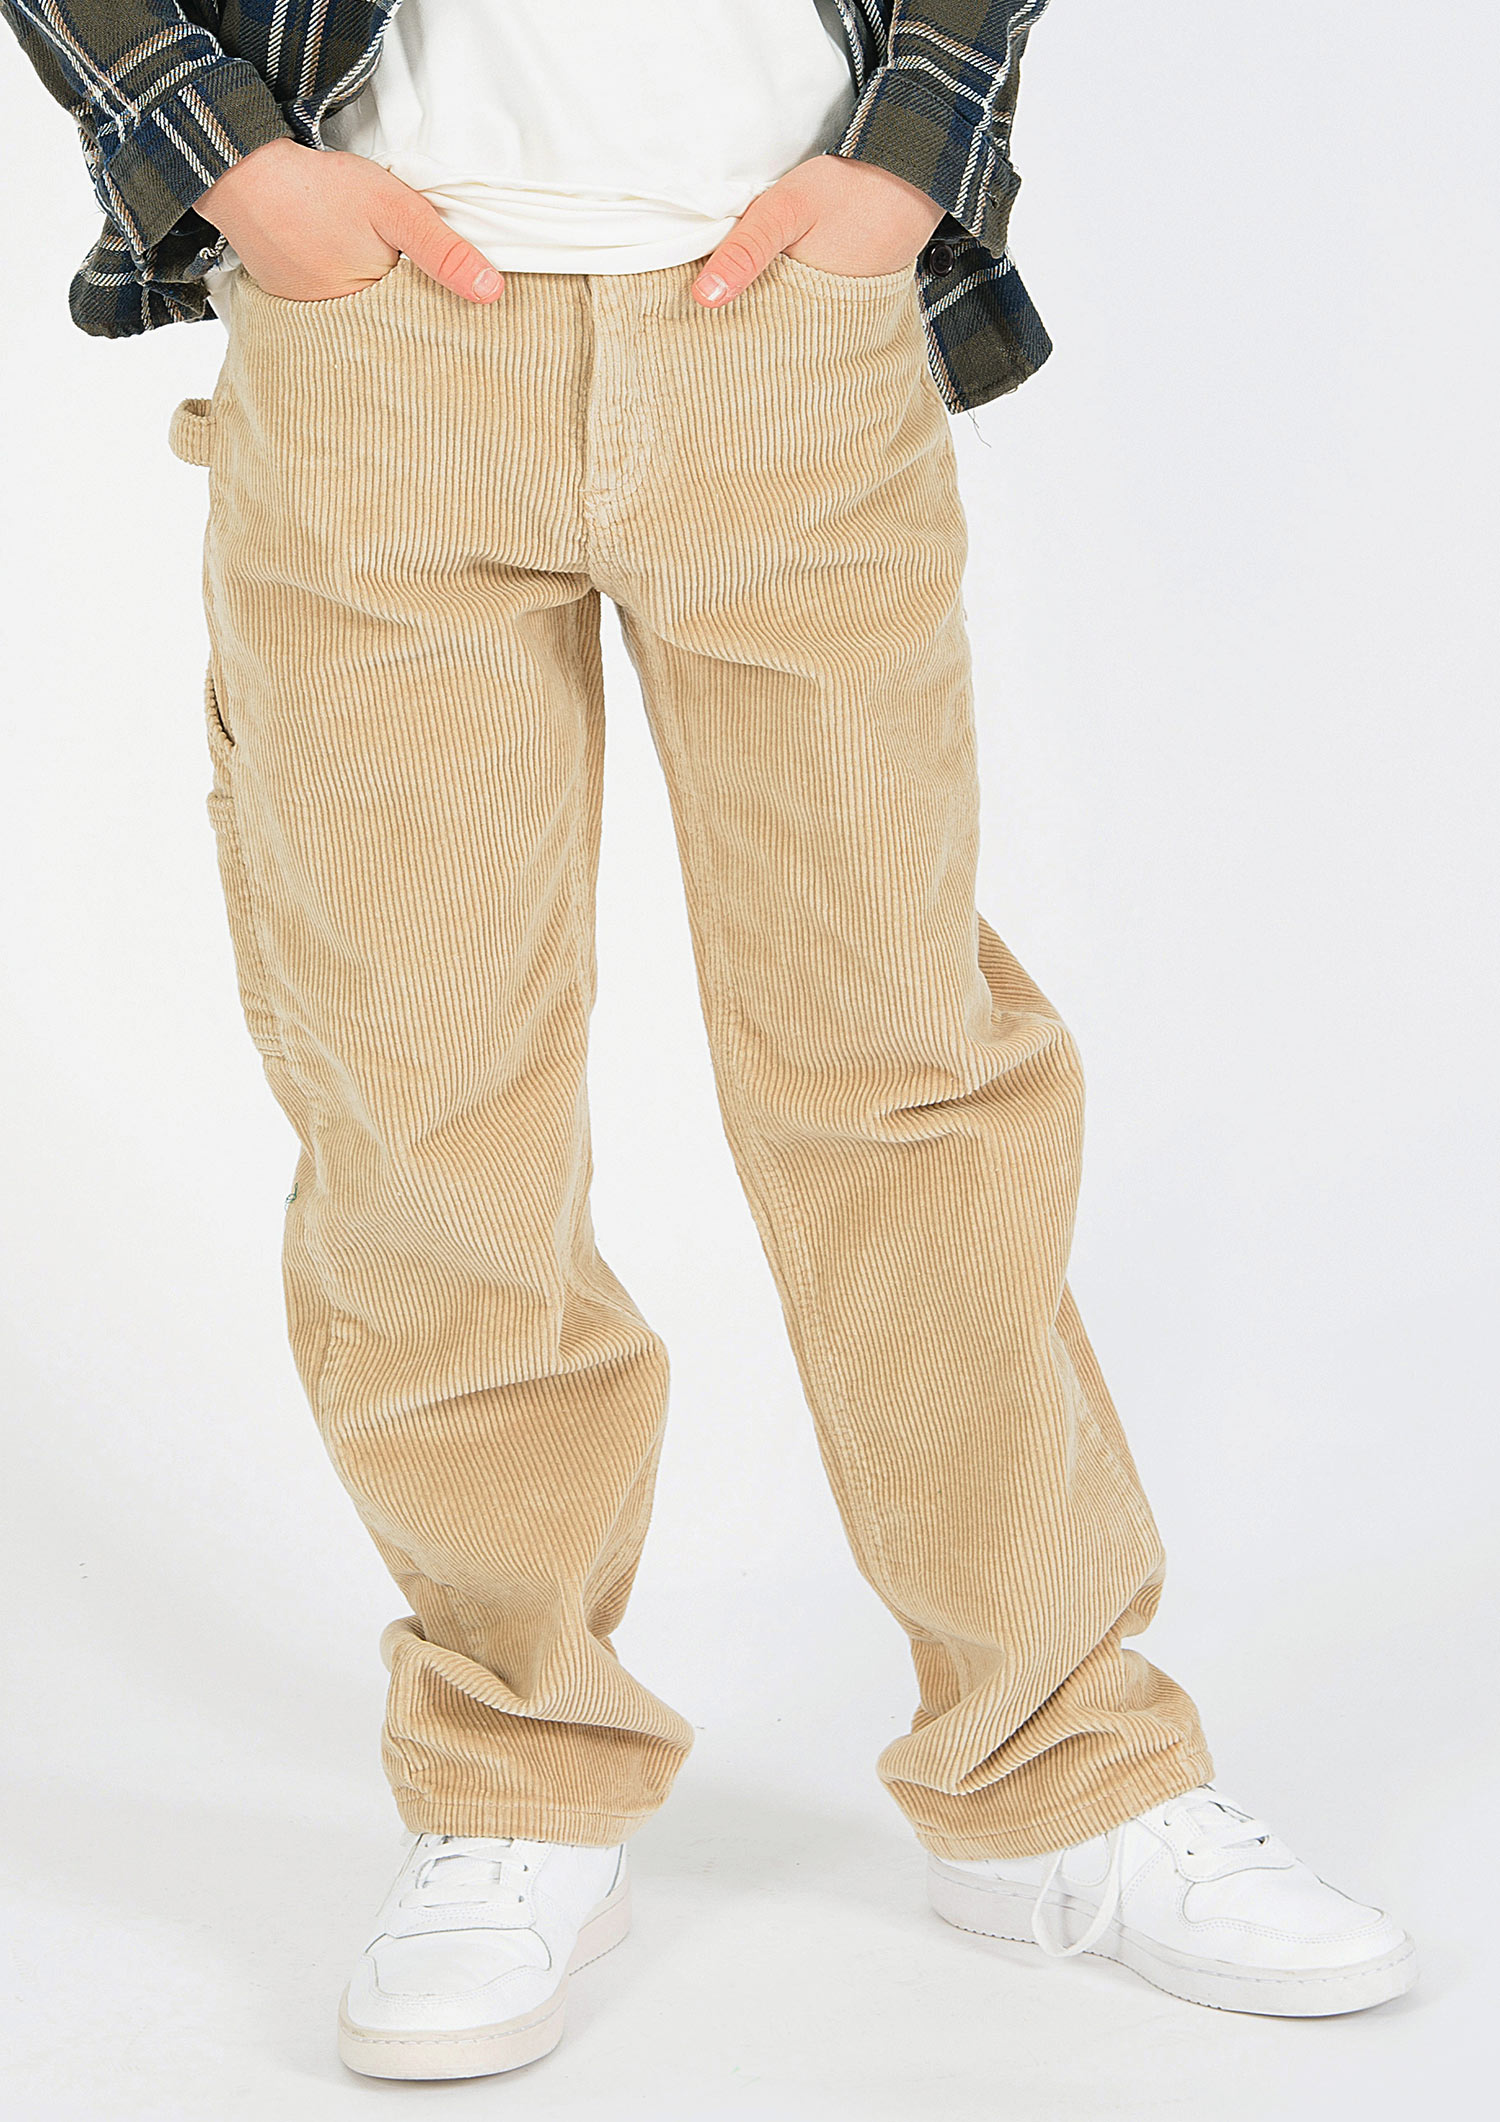 2859-Boys Worker Baggy Pant Corduroy, available in Normal